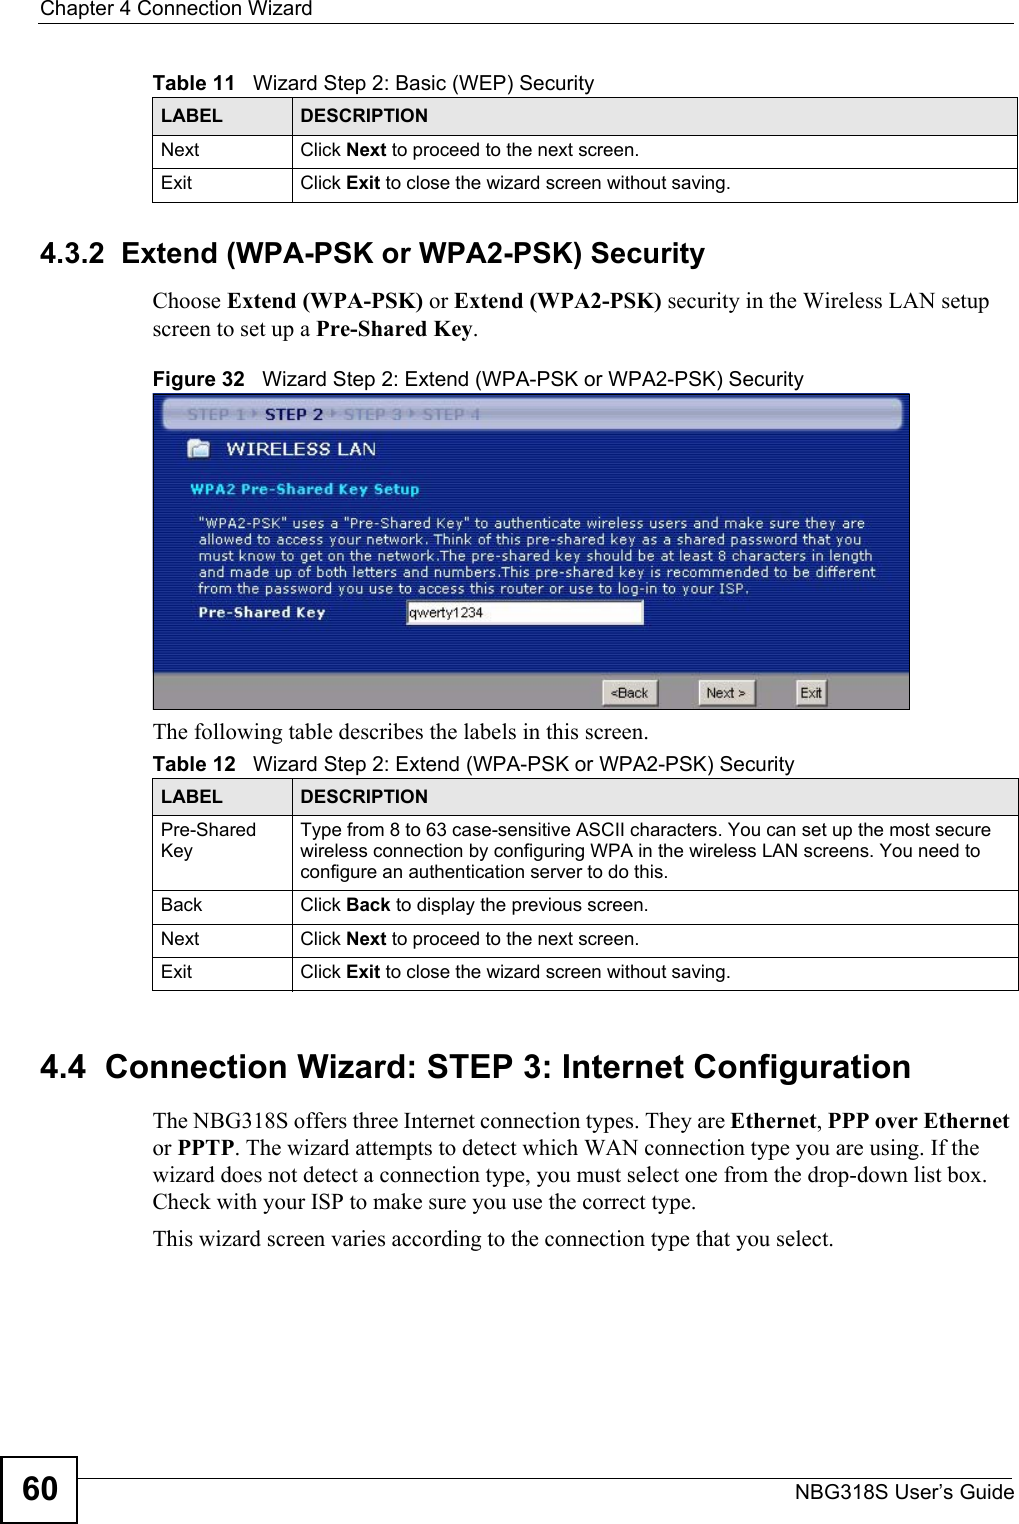 Chapter 4 Connection WizardNBG318S User’s Guide604.3.2  Extend (WPA-PSK or WPA2-PSK) SecurityChoose Extend (WPA-PSK) or Extend (WPA2-PSK) security in the Wireless LAN setup screen to set up a Pre-Shared Key.Figure 32   Wizard Step 2: Extend (WPA-PSK or WPA2-PSK) SecurityThe following table describes the labels in this screen. 4.4  Connection Wizard: STEP 3: Internet ConfigurationThe NBG318S offers three Internet connection types. They are Ethernet, PPP over Ethernet or PPTP. The wizard attempts to detect which WAN connection type you are using. If the wizard does not detect a connection type, you must select one from the drop-down list box. Check with your ISP to make sure you use the correct type.This wizard screen varies according to the connection type that you select.Next Click Next to proceed to the next screen. Exit Click Exit to close the wizard screen without saving.Table 11   Wizard Step 2: Basic (WEP) SecurityLABEL DESCRIPTIONTable 12   Wizard Step 2: Extend (WPA-PSK or WPA2-PSK) SecurityLABEL DESCRIPTIONPre-Shared KeyType from 8 to 63 case-sensitive ASCII characters. You can set up the most secure wireless connection by configuring WPA in the wireless LAN screens. You need to configure an authentication server to do this.Back Click Back to display the previous screen.Next Click Next to proceed to the next screen. Exit Click Exit to close the wizard screen without saving.